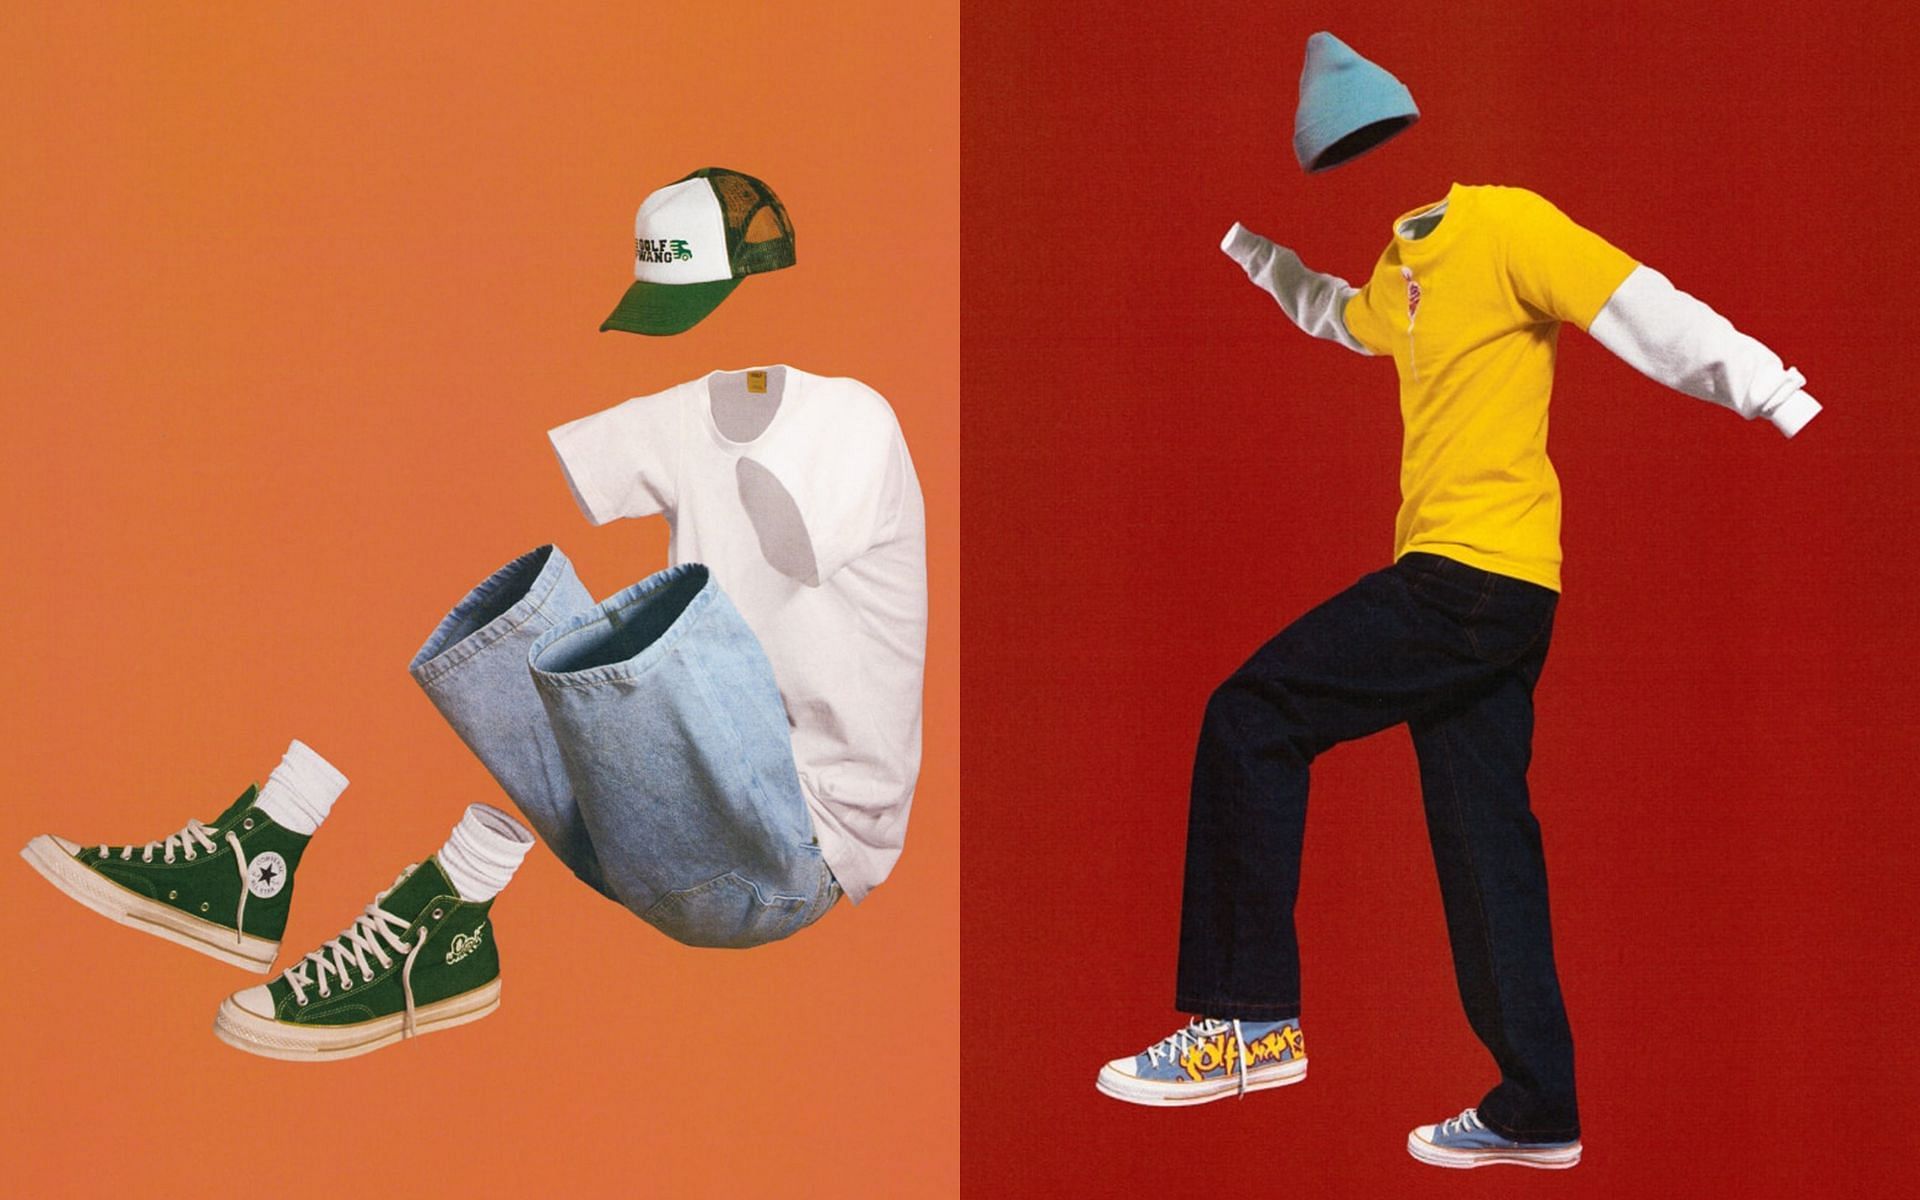 Converse X Golf Wang collab: Release date, price, and more about